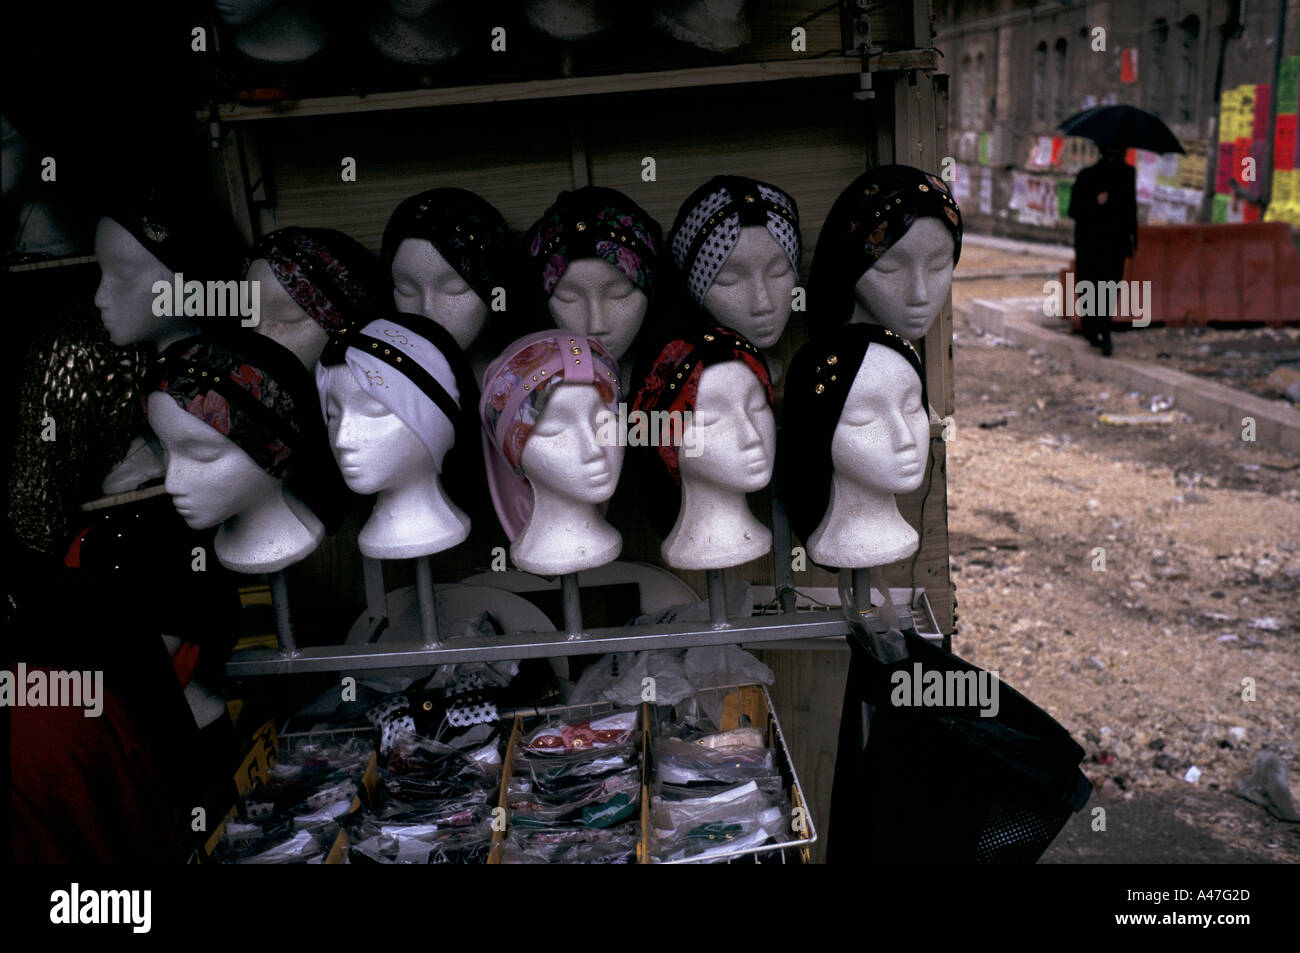 women wigs and scarves for sale on a market stall in the street in the ultra orthodox ghetto of Meir Sharim Jerusalem Israel Stock Photo